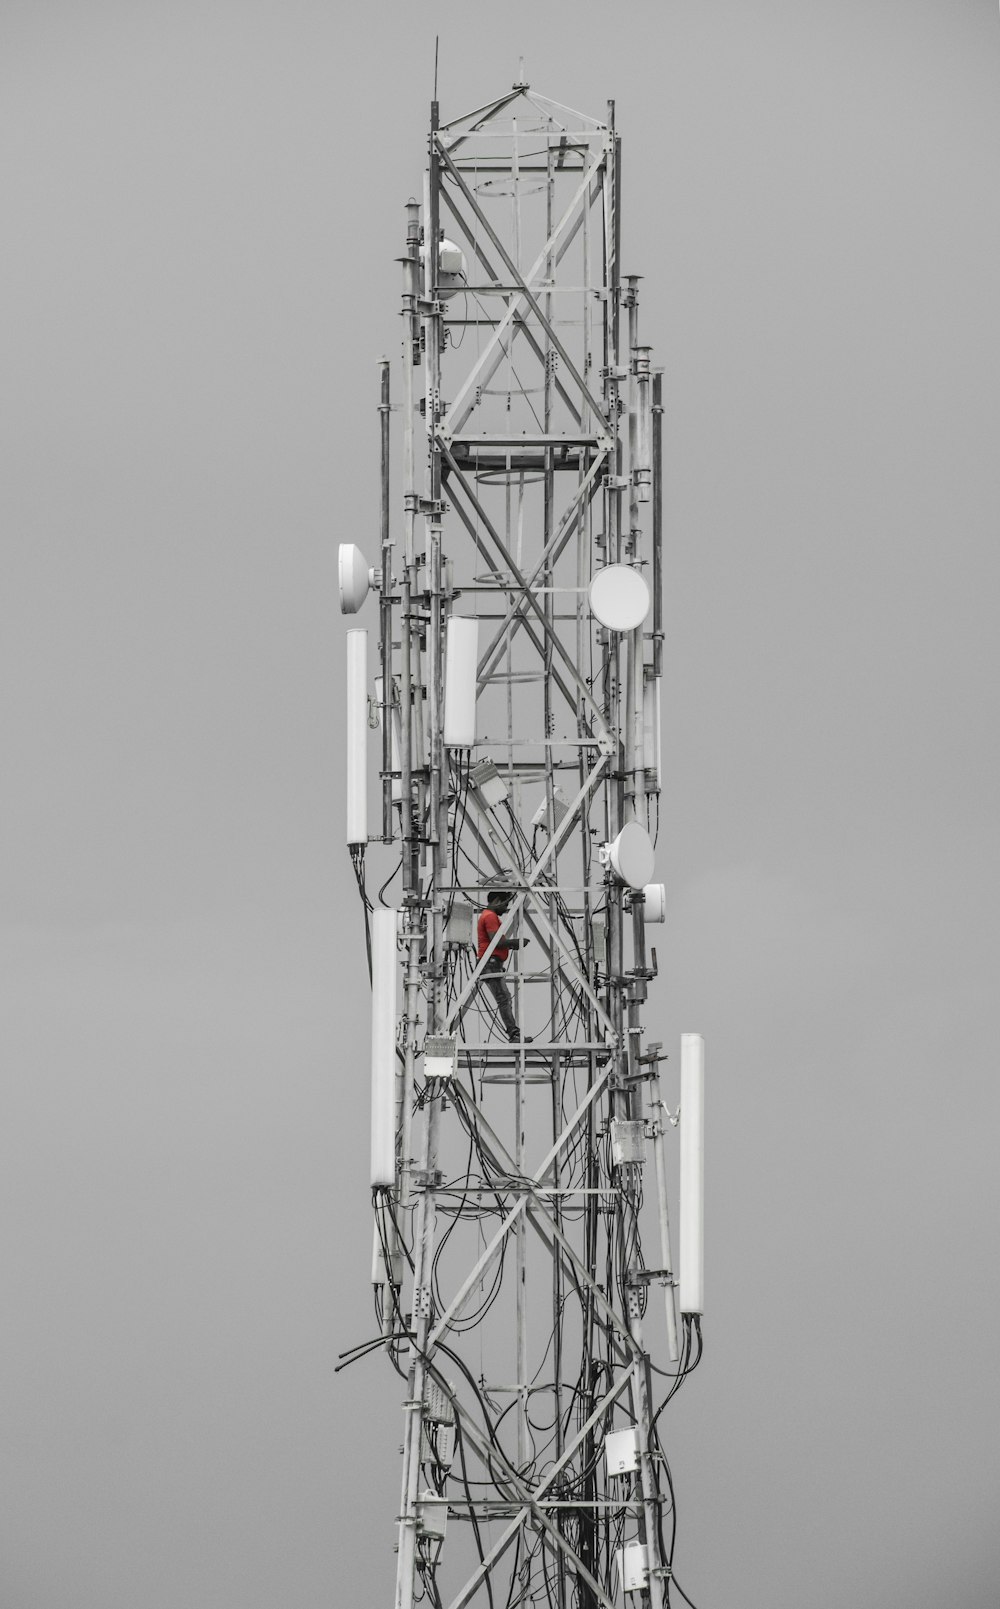 a tall tower with many antennas on top of it